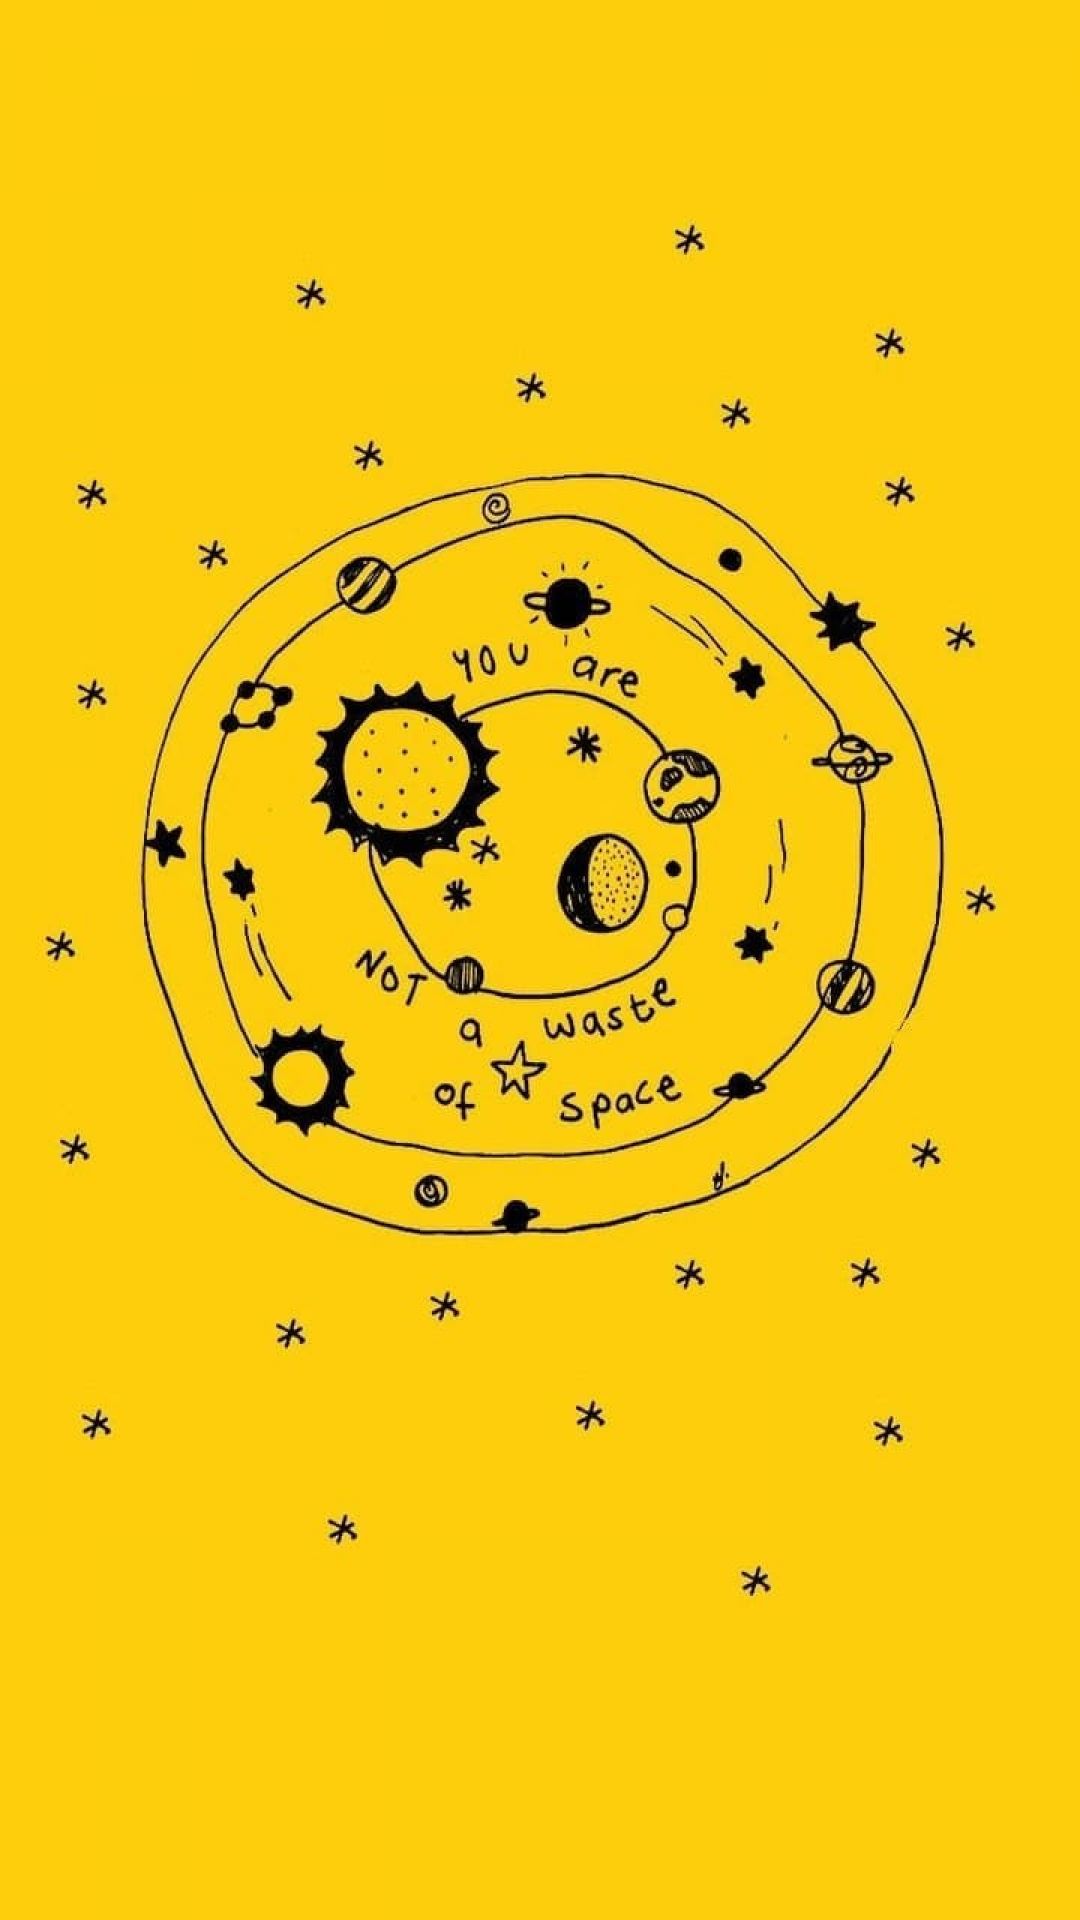 A yellow background with black drawings of the solar system - Non binary, yellow, yellow iphone, positivity, light yellow, happy, honey, positive